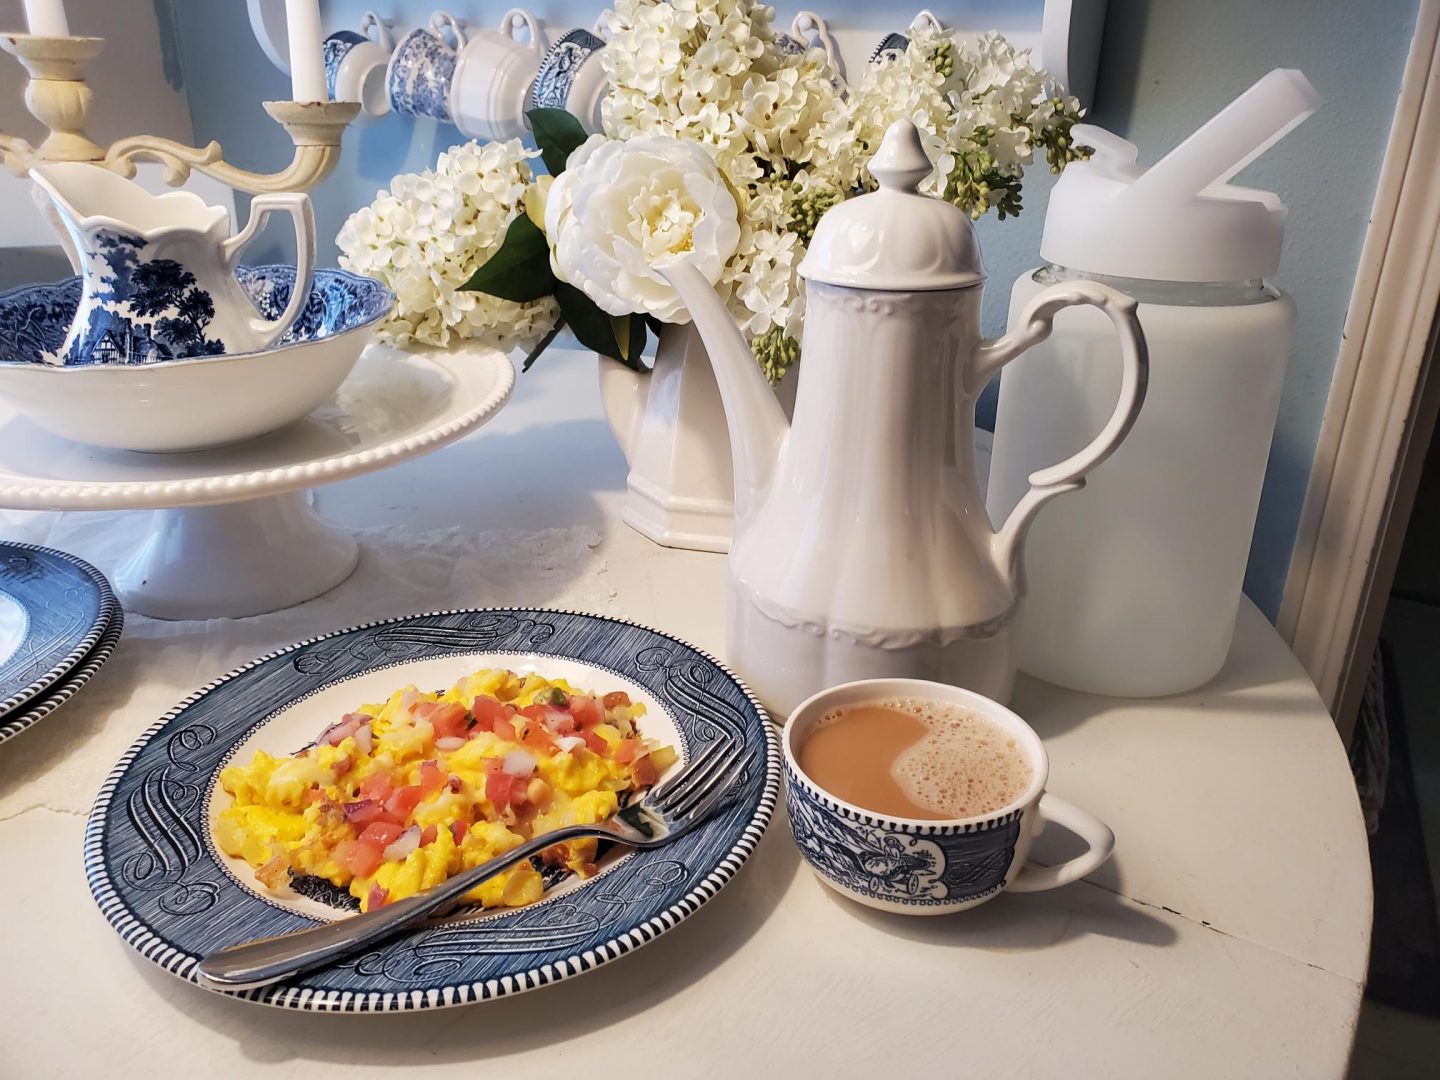 Simple breakfast with eggs, onions & peppers. And coffee, of course. All whole foods.